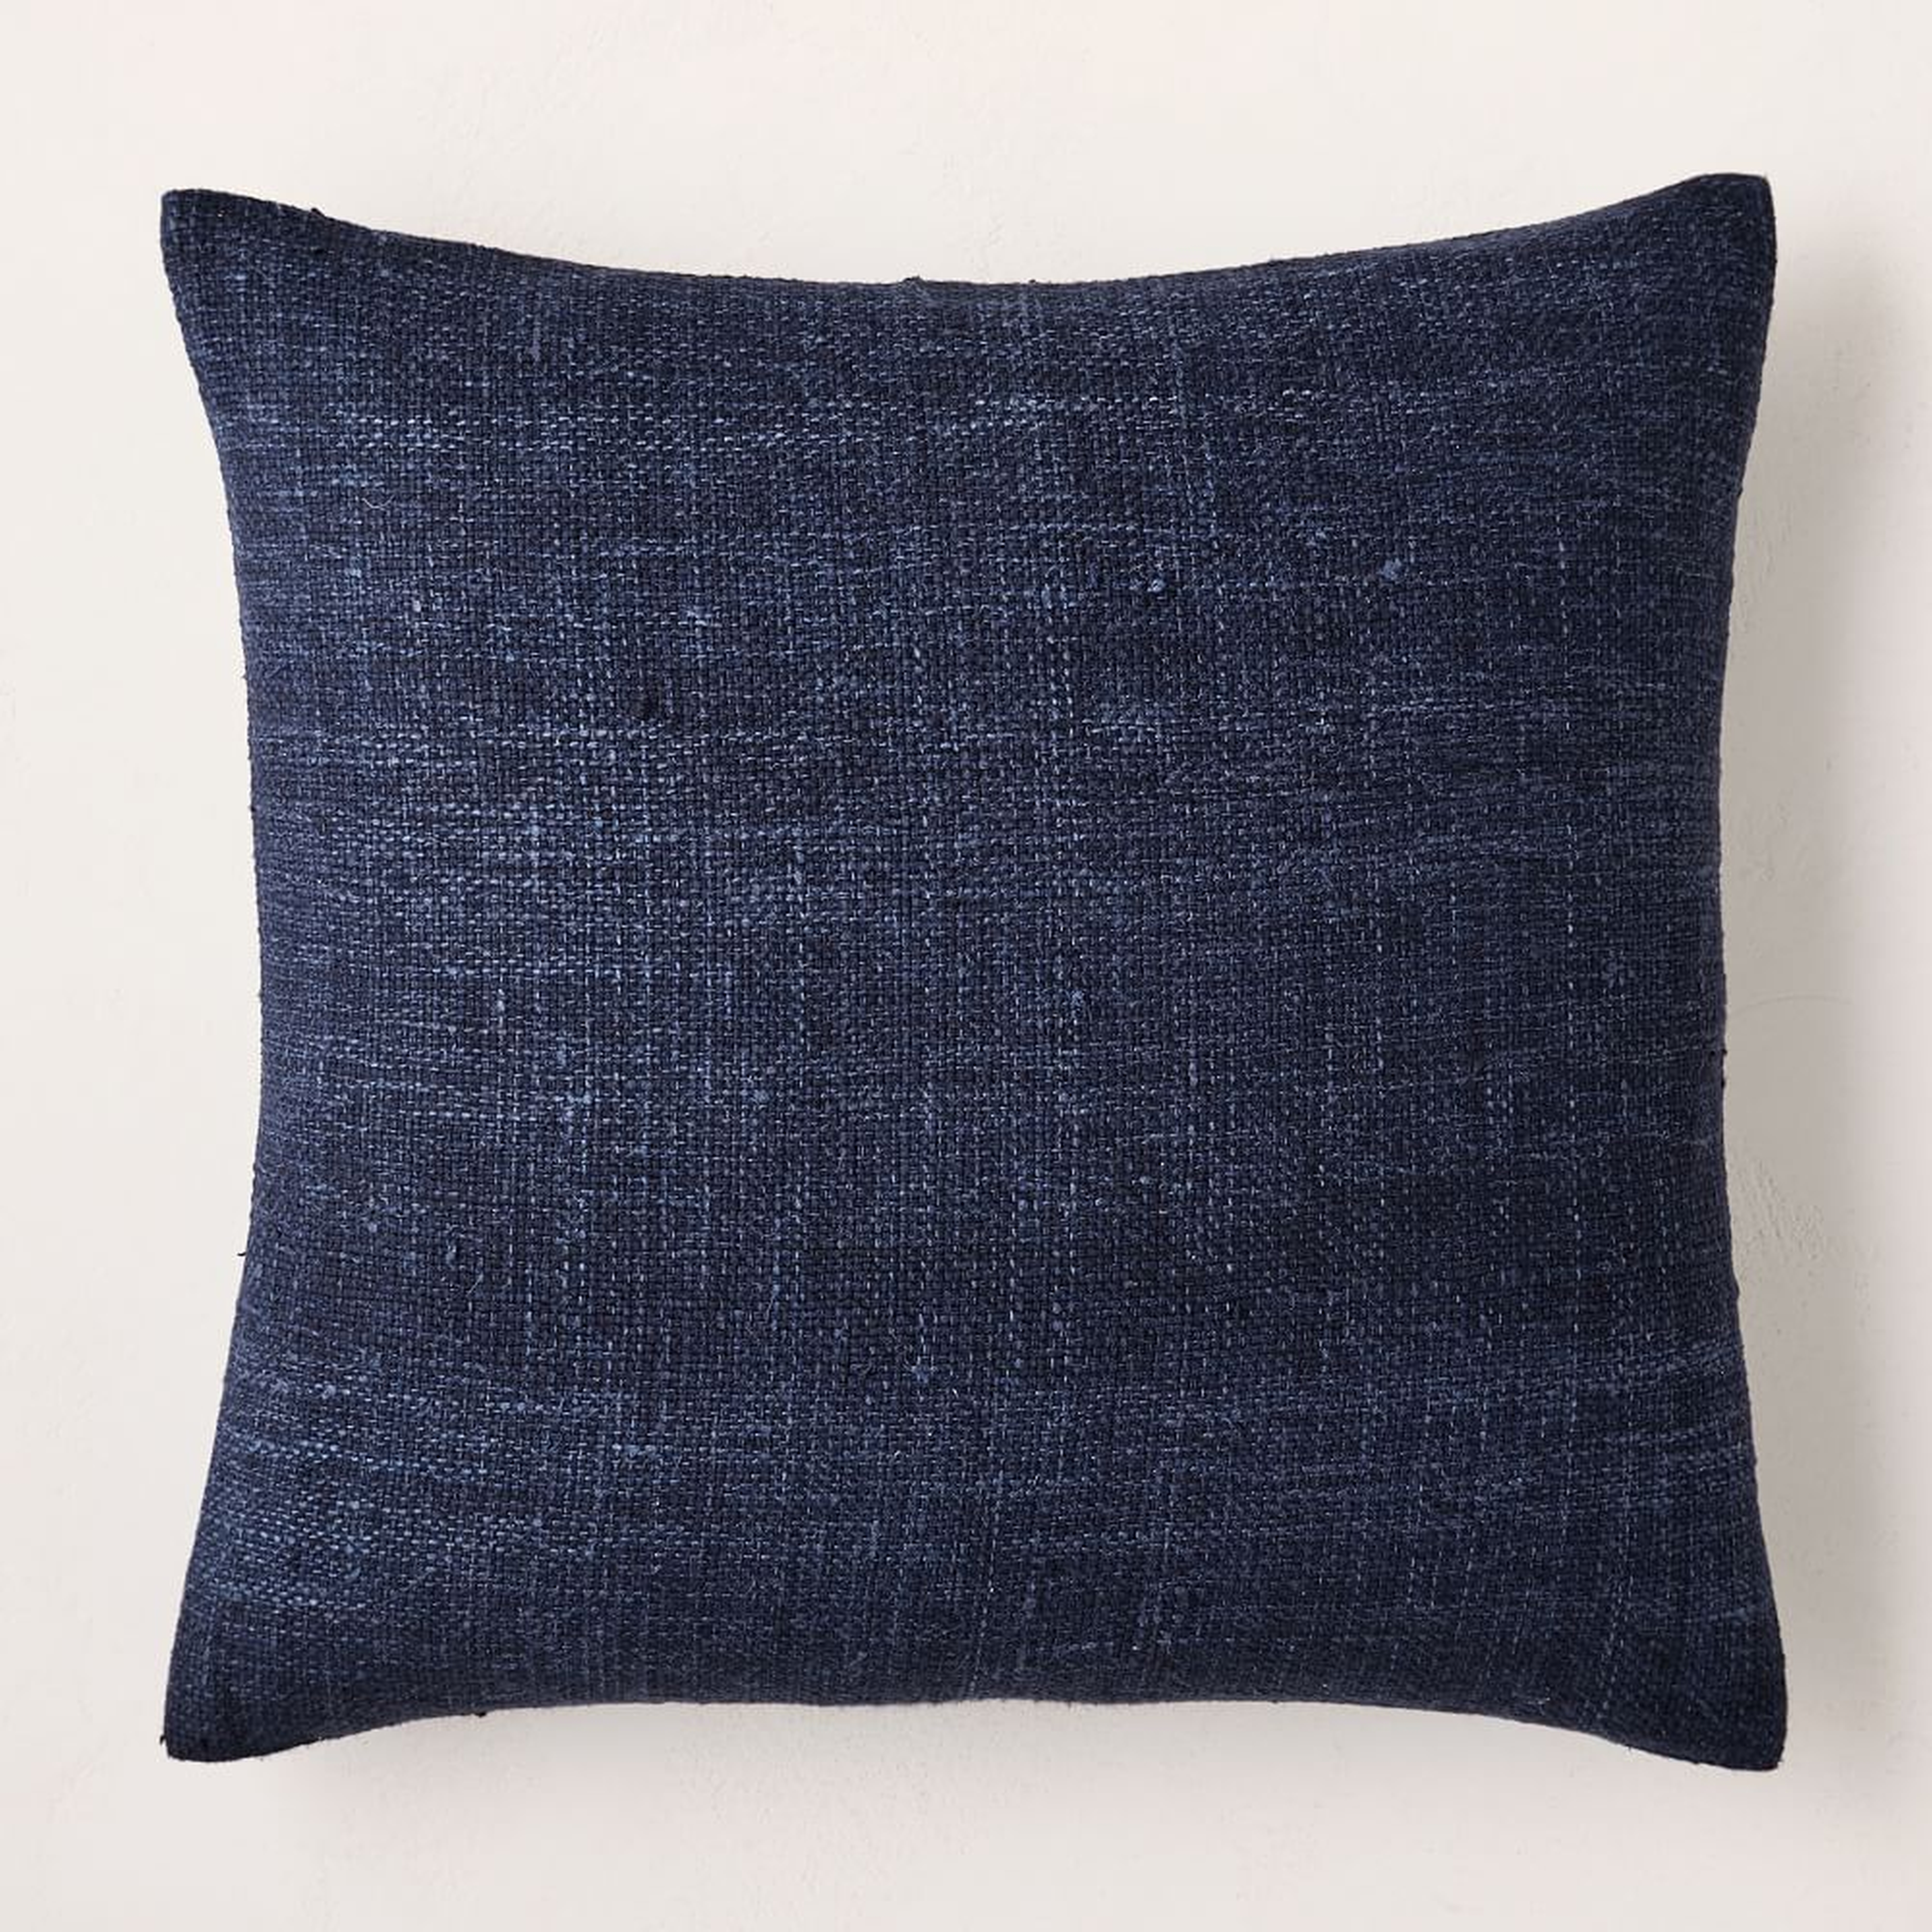 Silk Hand-Loomed Pillow Cover, 20"x20", Nightshade - West Elm